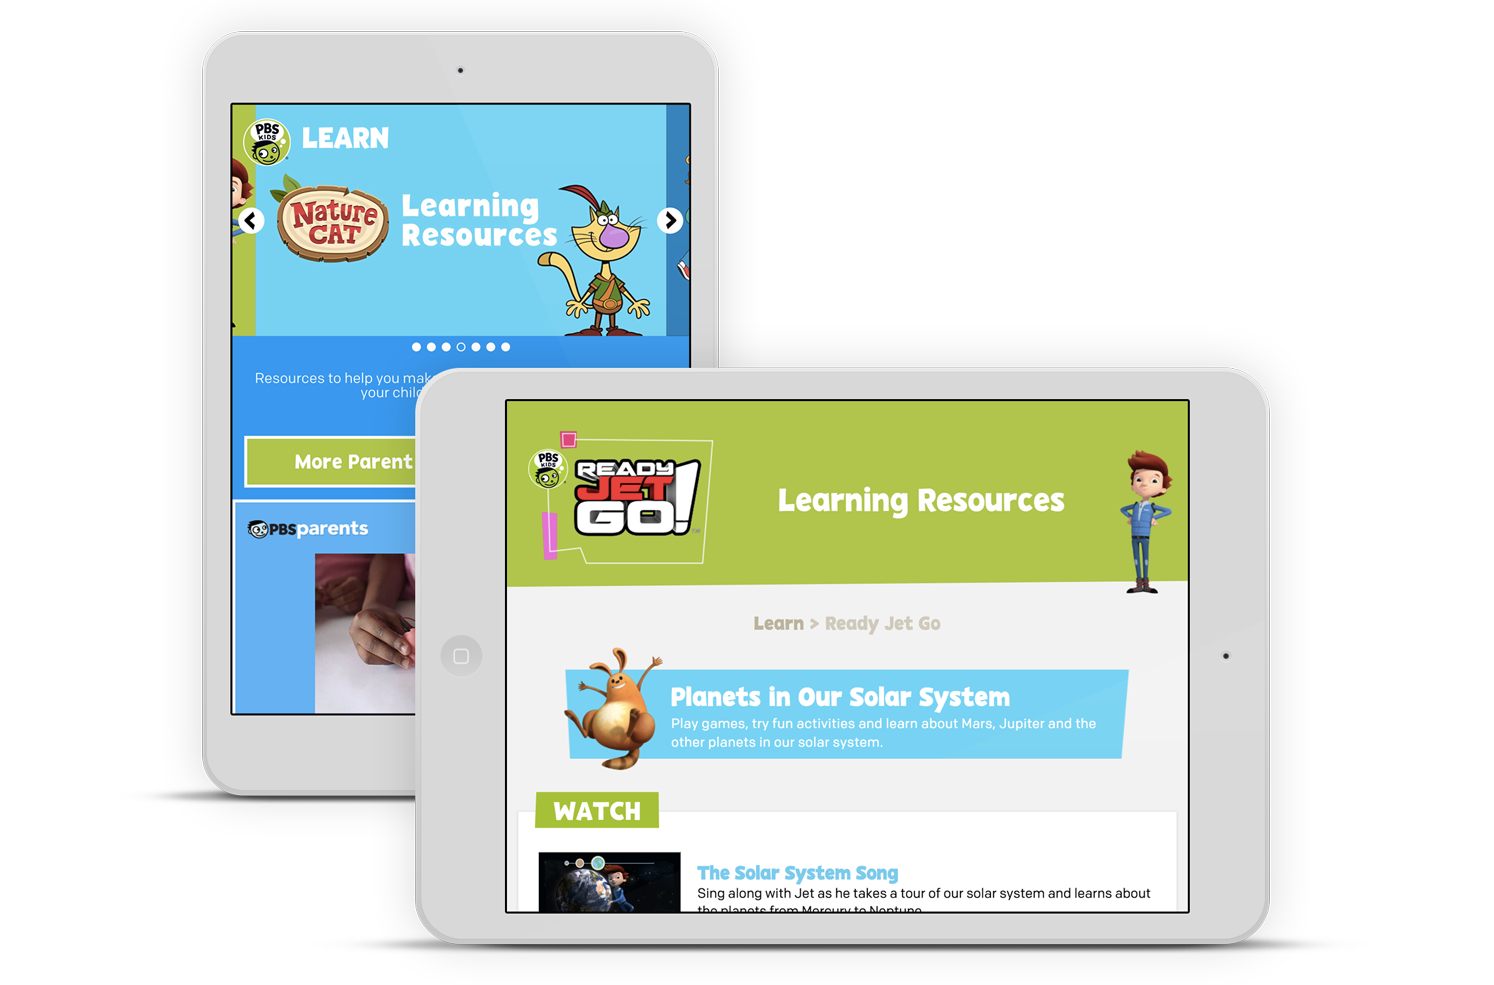 Web browser, iPhone, and iPad with PBS KIDS displayed